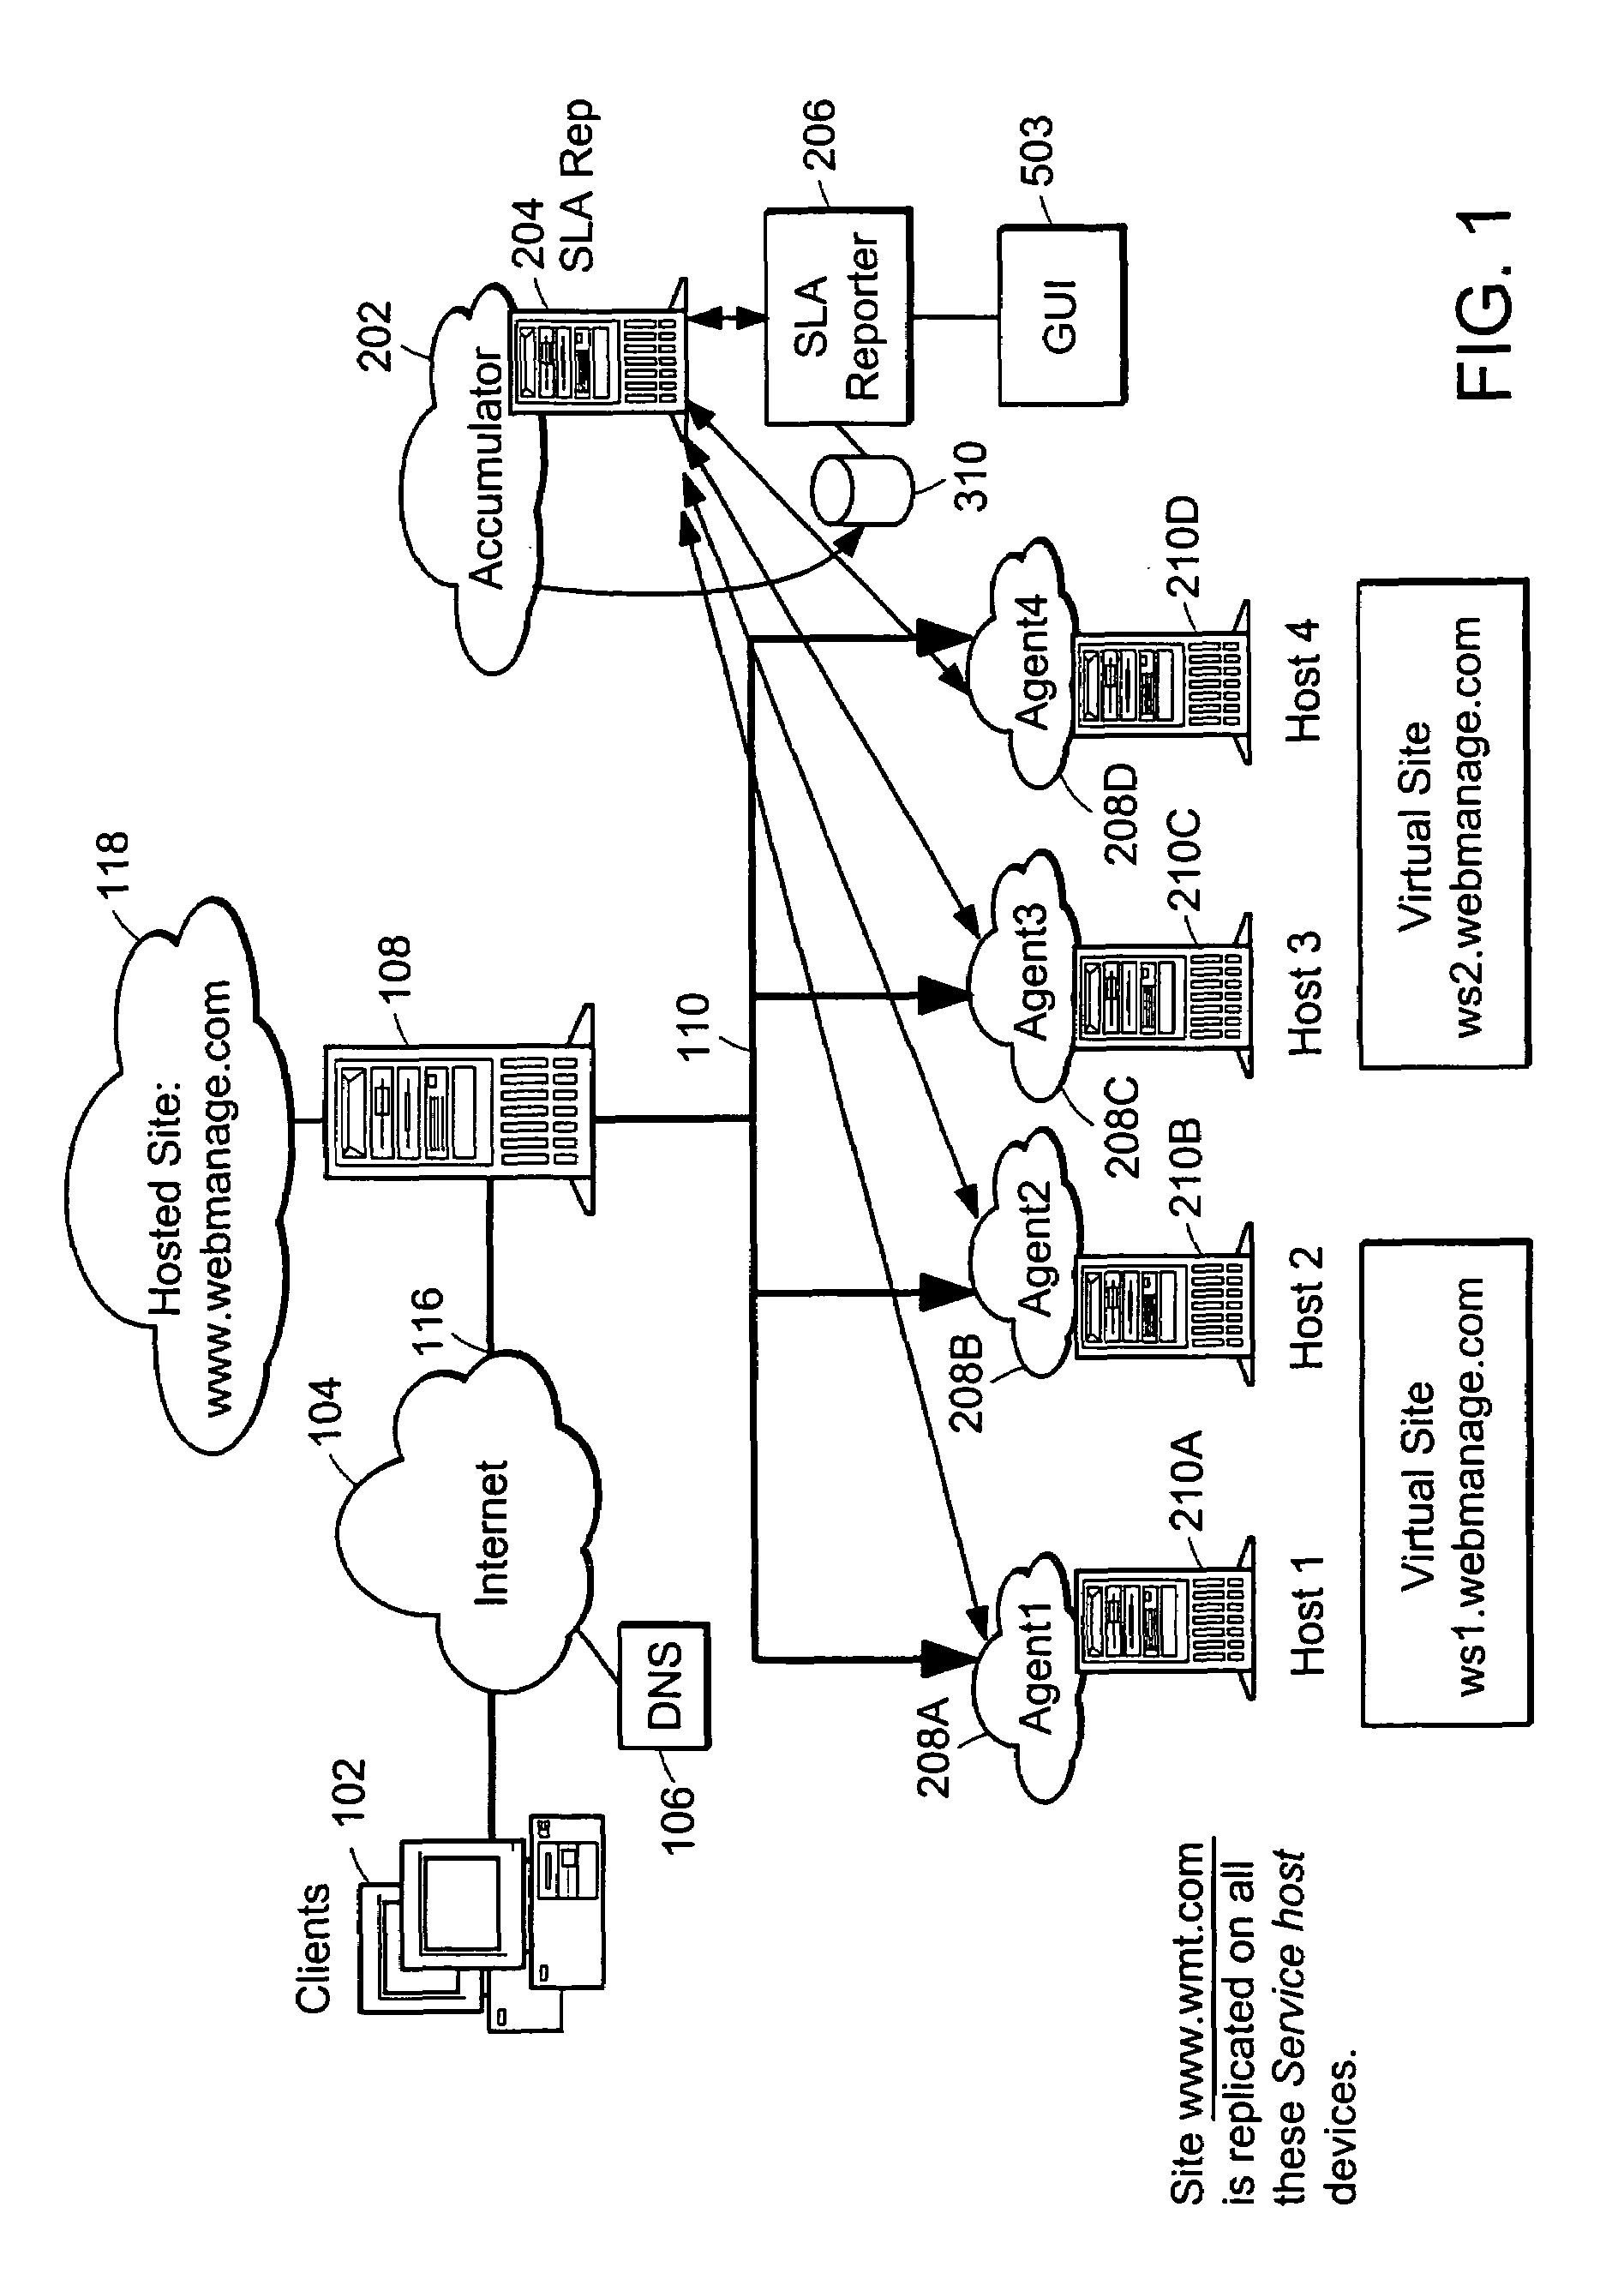 Method and apparatus for implementing a service-level agreement